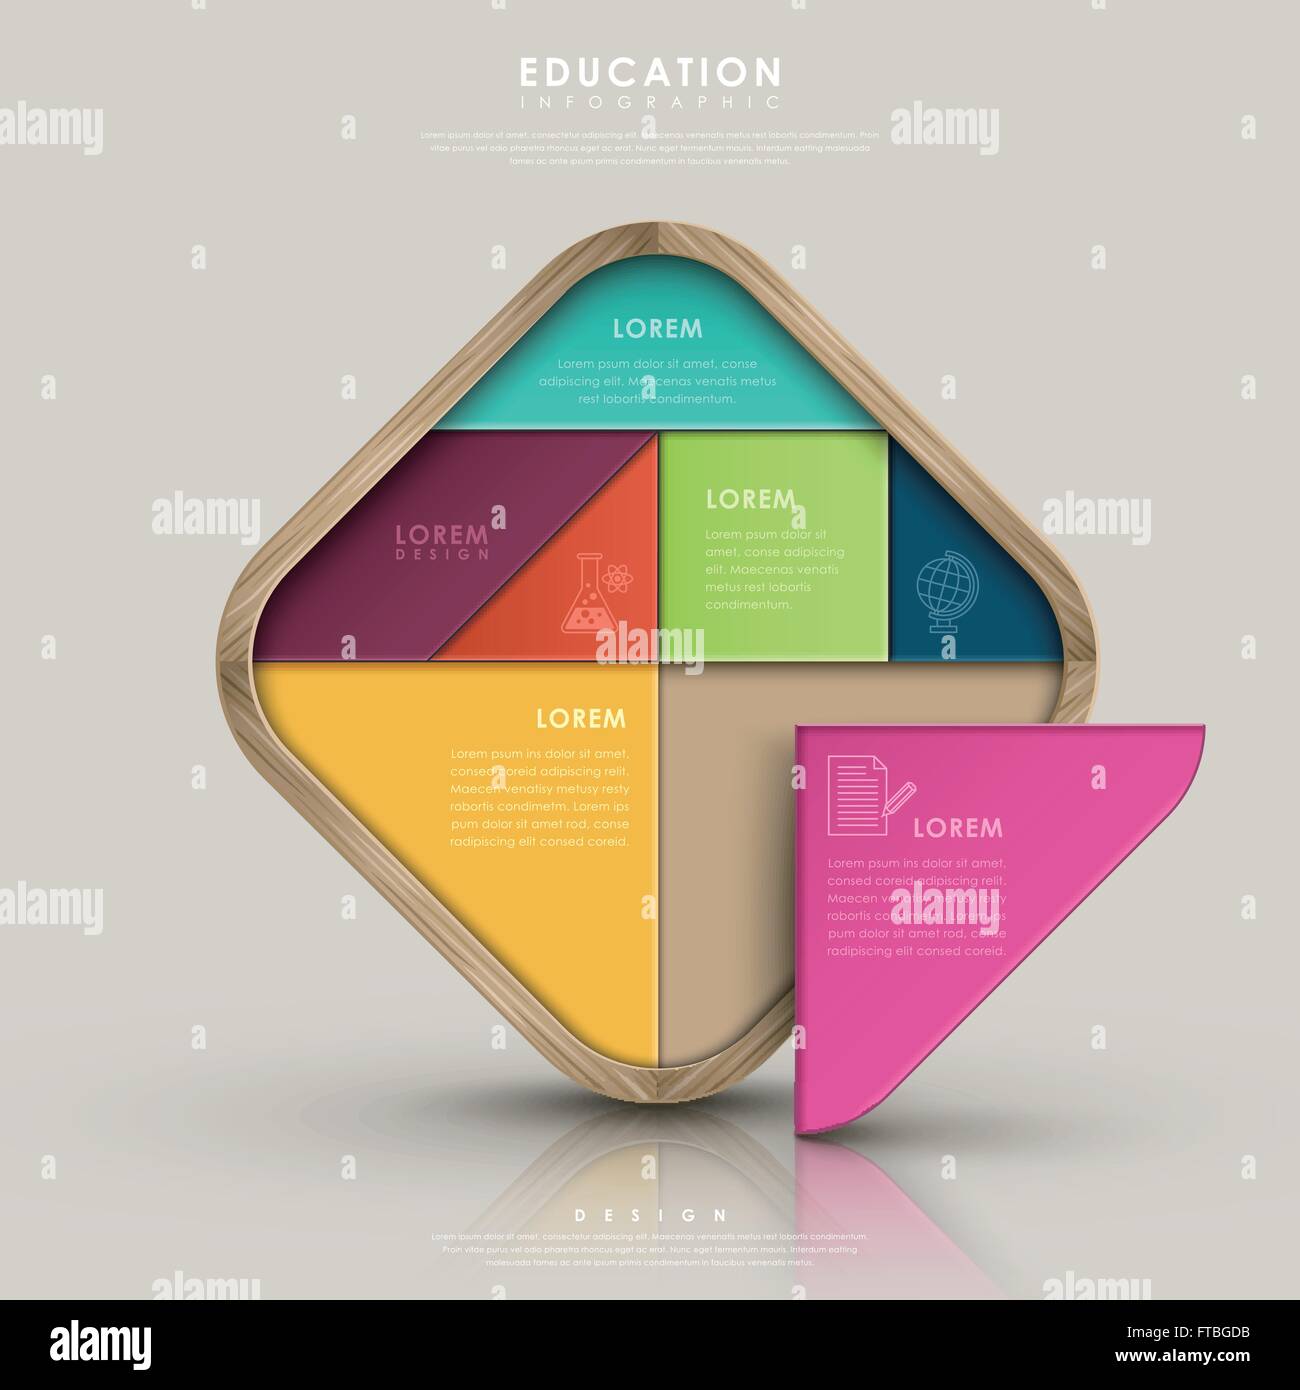 education infographic design with colorful tangram element Stock Vector